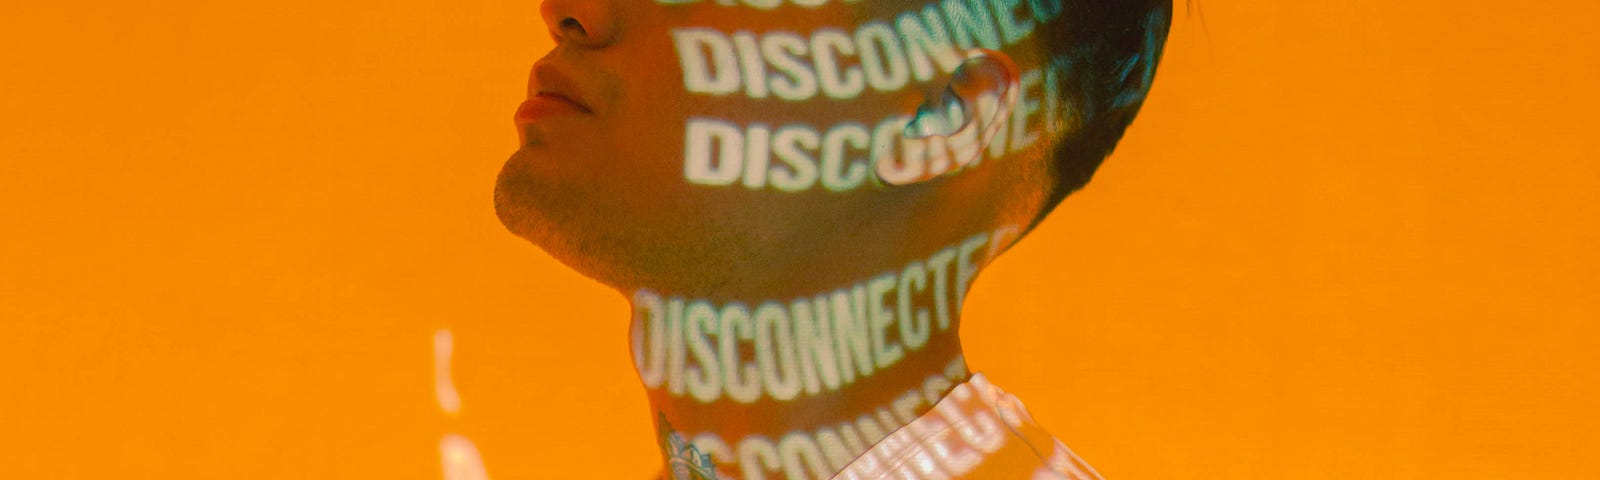 Picture of a man with the word “disconnected” projected numerous times on his body.